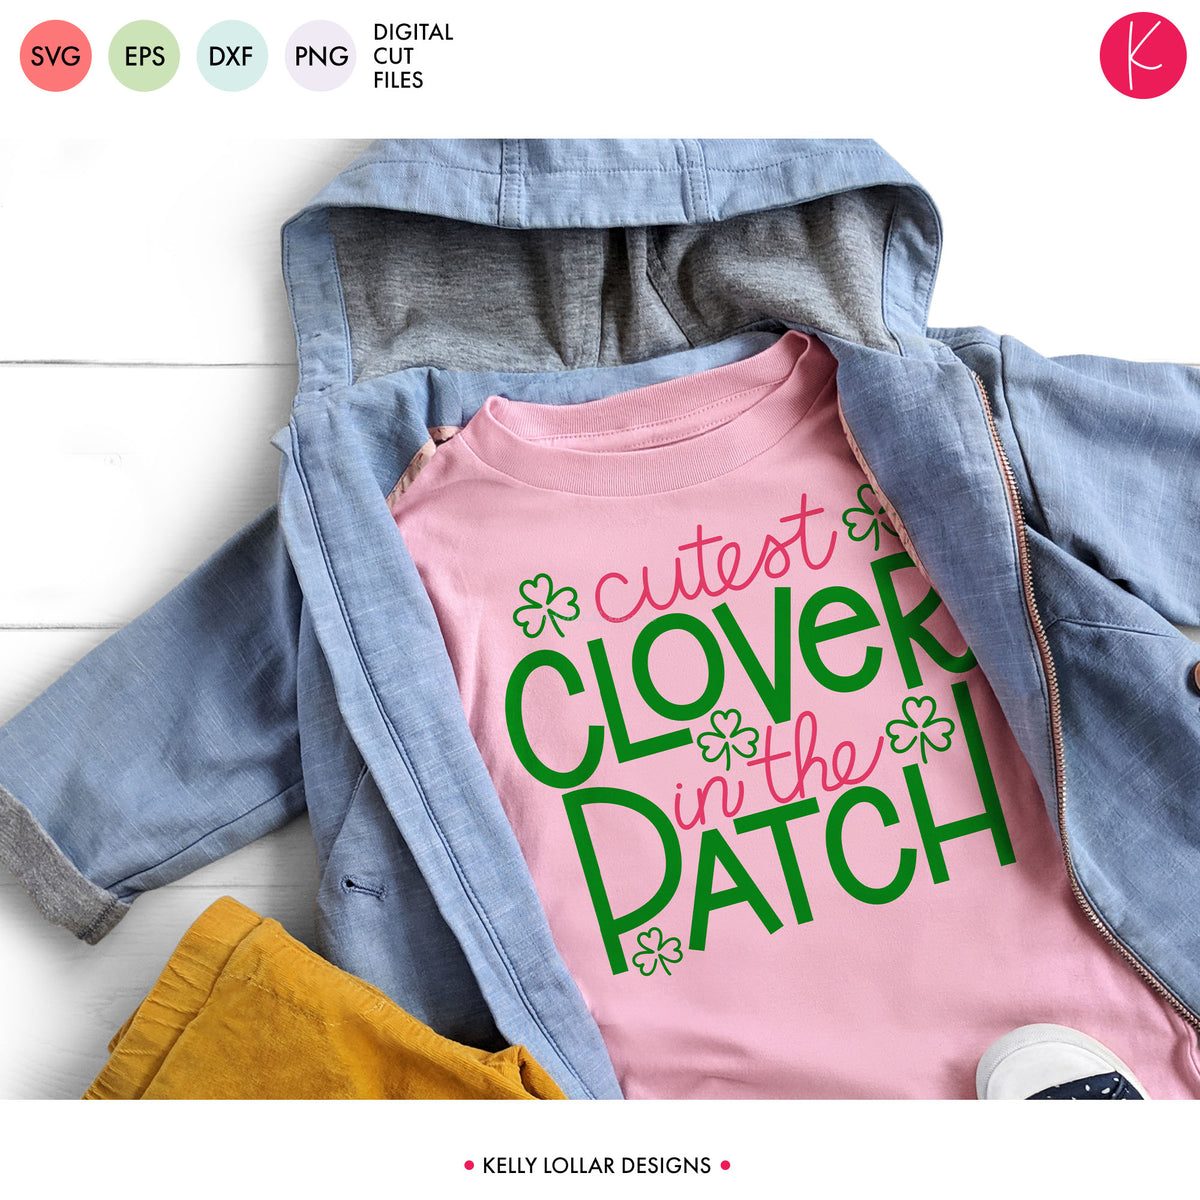 Cutest Clover in the Patch | SVG DXF EPS PNG Cut Files